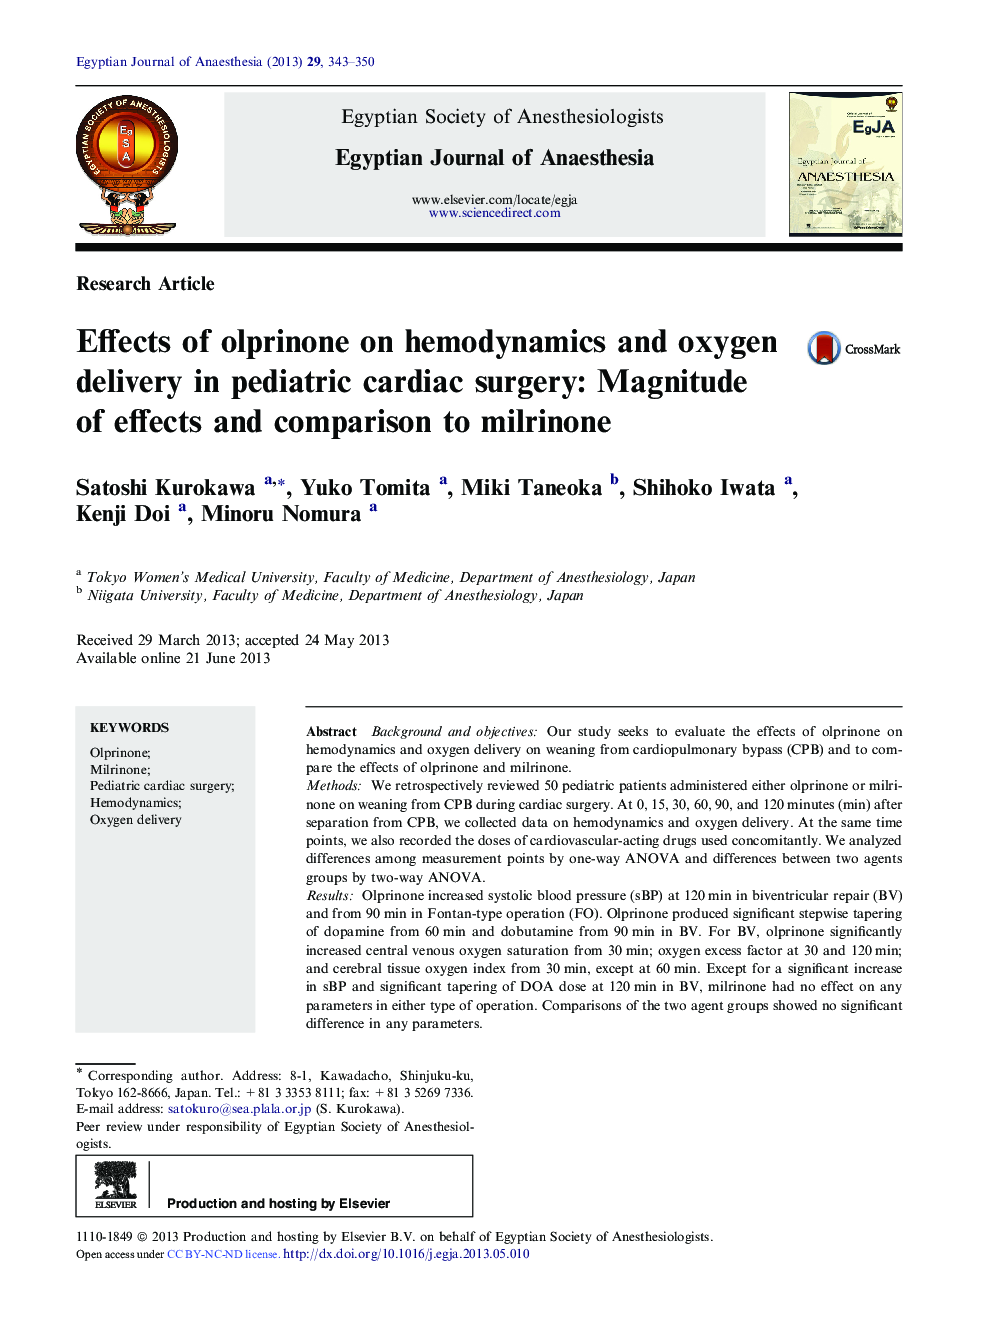 Effects of olprinone on hemodynamics and oxygen delivery in pediatric cardiac surgery: Magnitude of effects and comparison to milrinone 